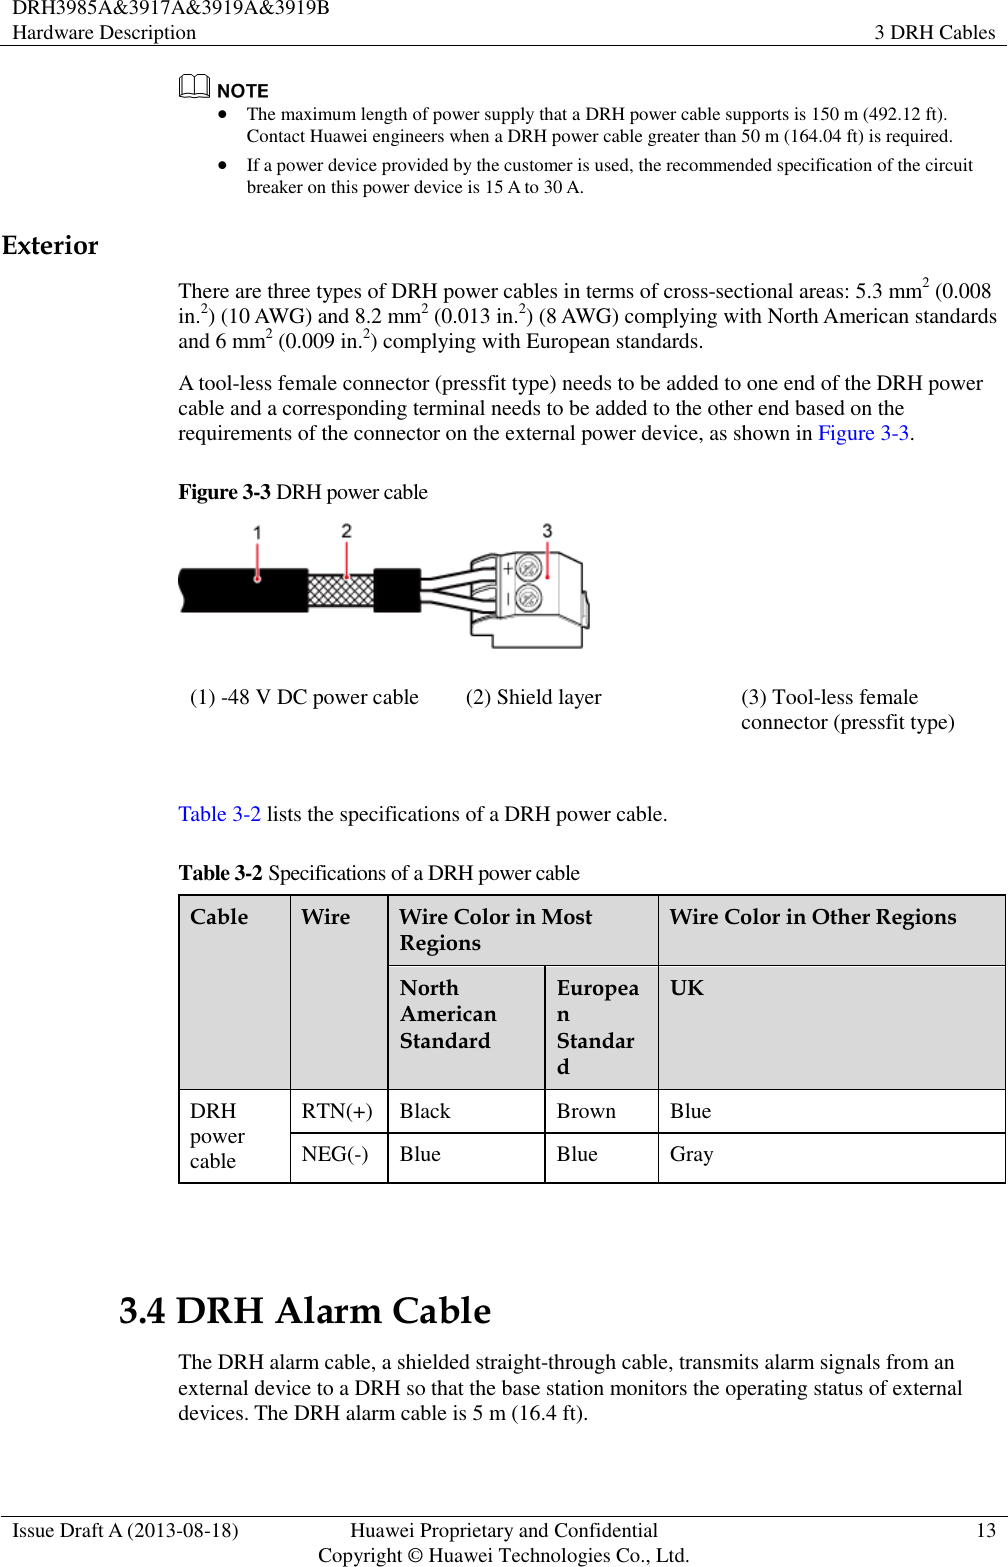 DRH3985A&amp;3917A&amp;3919A&amp;3919B Hardware Description 3 DRH Cables  Issue Draft A (2013-08-18) Huawei Proprietary and Confidential                                     Copyright © Huawei Technologies Co., Ltd. 13    The maximum length of power supply that a DRH power cable supports is 150 m (492.12 ft). Contact Huawei engineers when a DRH power cable greater than 50 m (164.04 ft) is required.    If a power device provided by the customer is used, the recommended specification of the circuit breaker on this power device is 15 A to 30 A. Exterior There are three types of DRH power cables in terms of cross-sectional areas: 5.3 mm2 (0.008 in.2) (10 AWG) and 8.2 mm2 (0.013 in.2) (8 AWG) complying with North American standards and 6 mm2 (0.009 in.2) complying with European standards. A tool-less female connector (pressfit type) needs to be added to one end of the DRH power cable and a corresponding terminal needs to be added to the other end based on the requirements of the connector on the external power device, as shown in Figure 3-3. Figure 3-3 DRH power cable  (1) -48 V DC power cable (2) Shield layer (3) Tool-less female connector (pressfit type)  Table 3-2 lists the specifications of a DRH power cable. Table 3-2 Specifications of a DRH power cable Cable Wire Wire Color in Most Regions Wire Color in Other Regions North American Standard European Standard UK DRH power cable RTN(+) Black Brown Blue NEG(-) Blue Blue Gray  3.4 DRH Alarm Cable The DRH alarm cable, a shielded straight-through cable, transmits alarm signals from an external device to a DRH so that the base station monitors the operating status of external devices. The DRH alarm cable is 5 m (16.4 ft). 